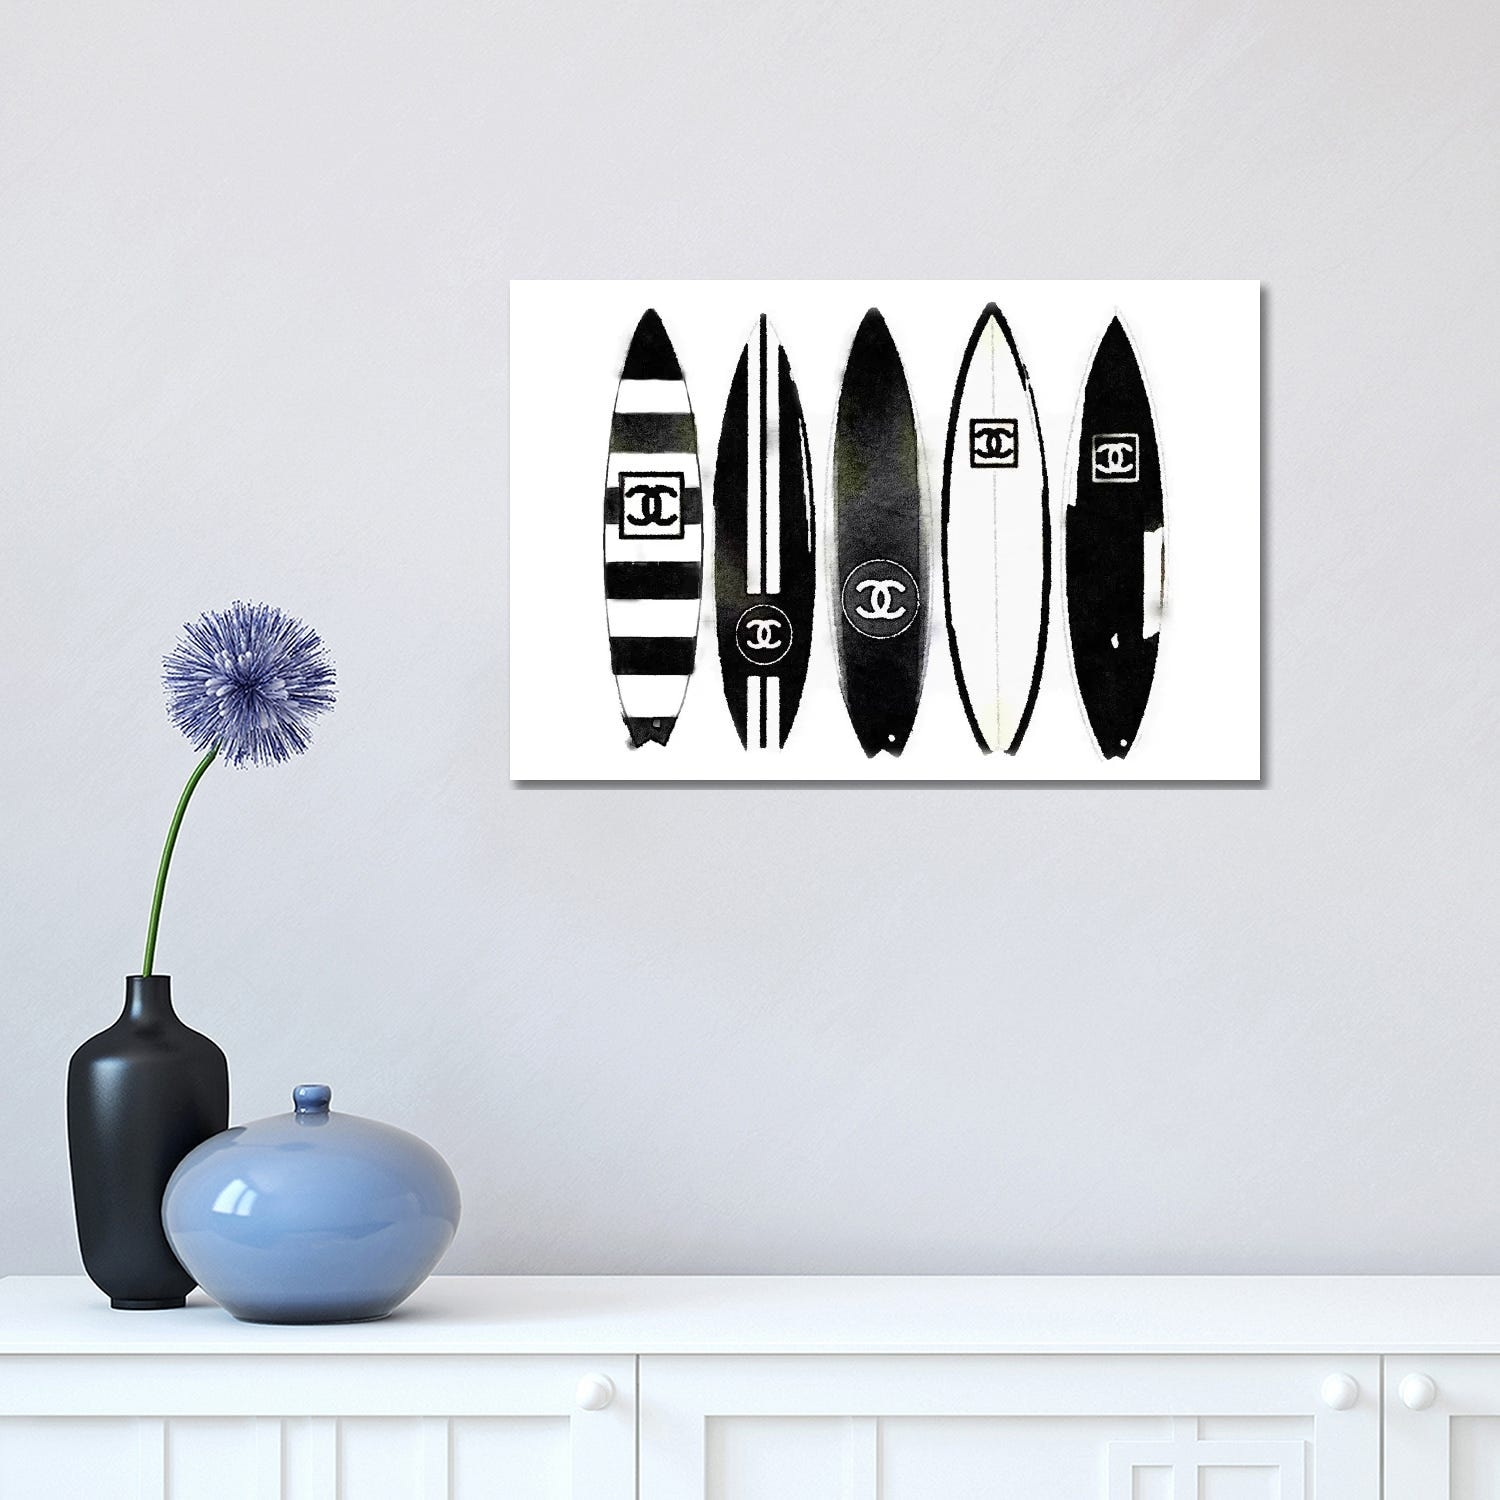 ICanvas Surf Black & White by Amanda Greenwood Gallery-Wrapped